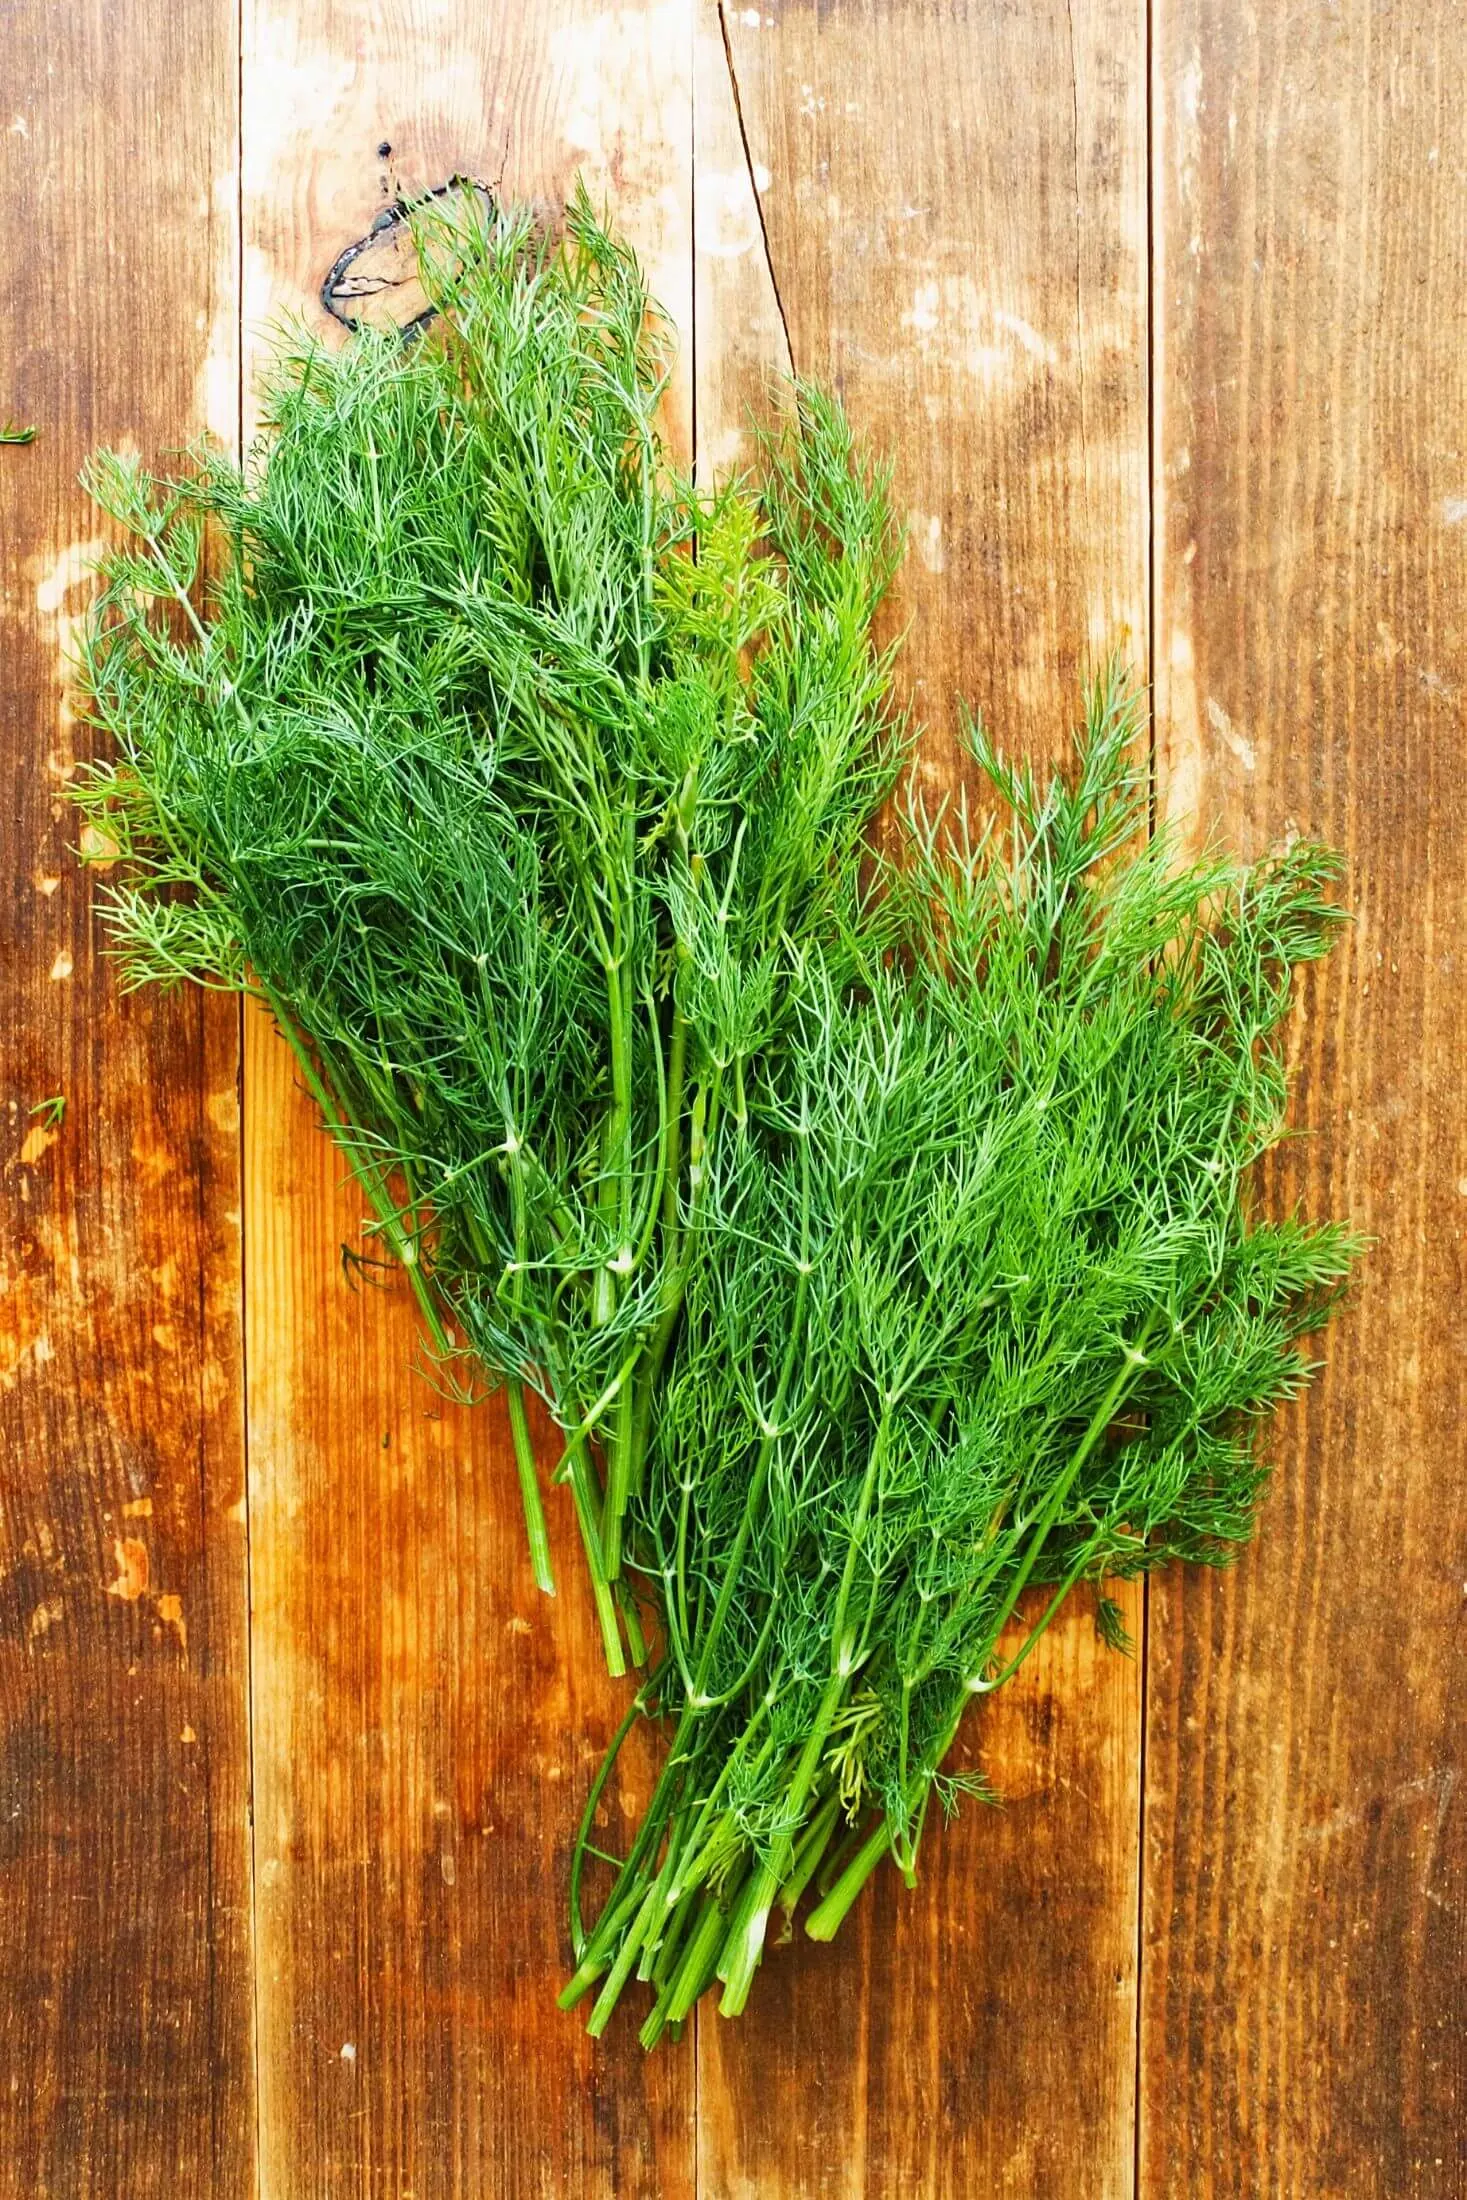 Bunch of dill on wooden cutting board.